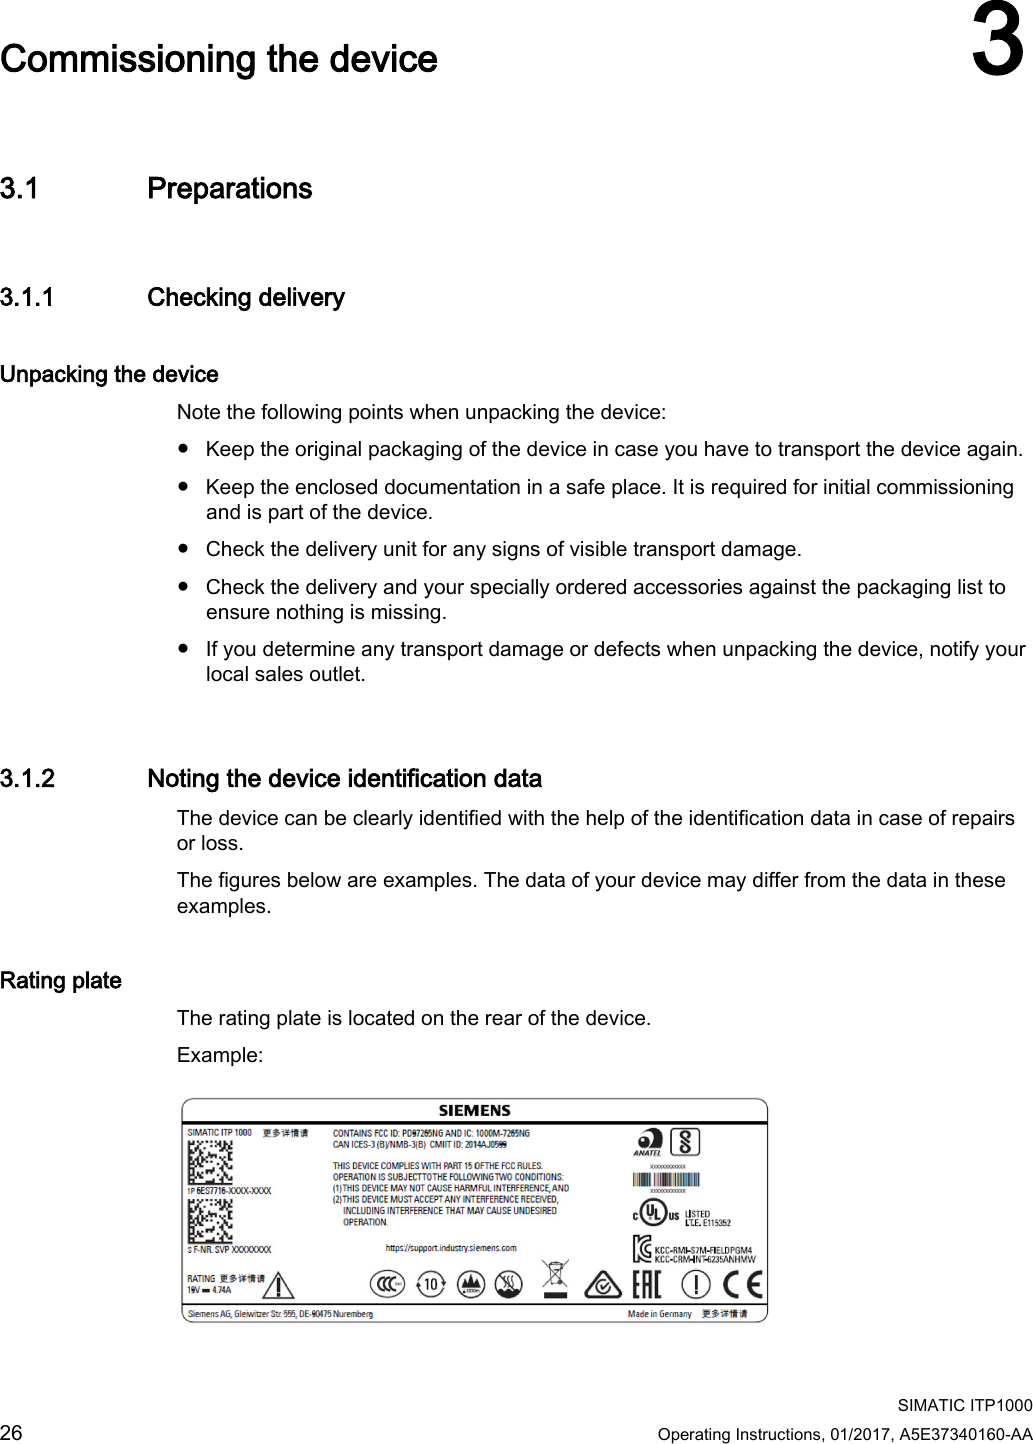    SIMATIC ITP1000 26  Operating Instructions, 01/2017, A5E37340160-AA   Commissioning the device 3 3.1 Preparations 3.1.1 Checking delivery Unpacking the device Note the following points when unpacking the device: ● Keep the original packaging of the device in case you have to transport the device again. ● Keep the enclosed documentation in a safe place. It is required for initial commissioning and is part of the device. ● Check the delivery unit for any signs of visible transport damage. ● Check the delivery and your specially ordered accessories against the packaging list to ensure nothing is missing. ● If you determine any transport damage or defects when unpacking the device, notify your local sales outlet. 3.1.2 Noting the device identification data The device can be clearly identified with the help of the identification data in case of repairs or loss. The figures below are examples. The data of your device may differ from the data in these examples. Rating plate The rating plate is located on the rear of the device. Example:  